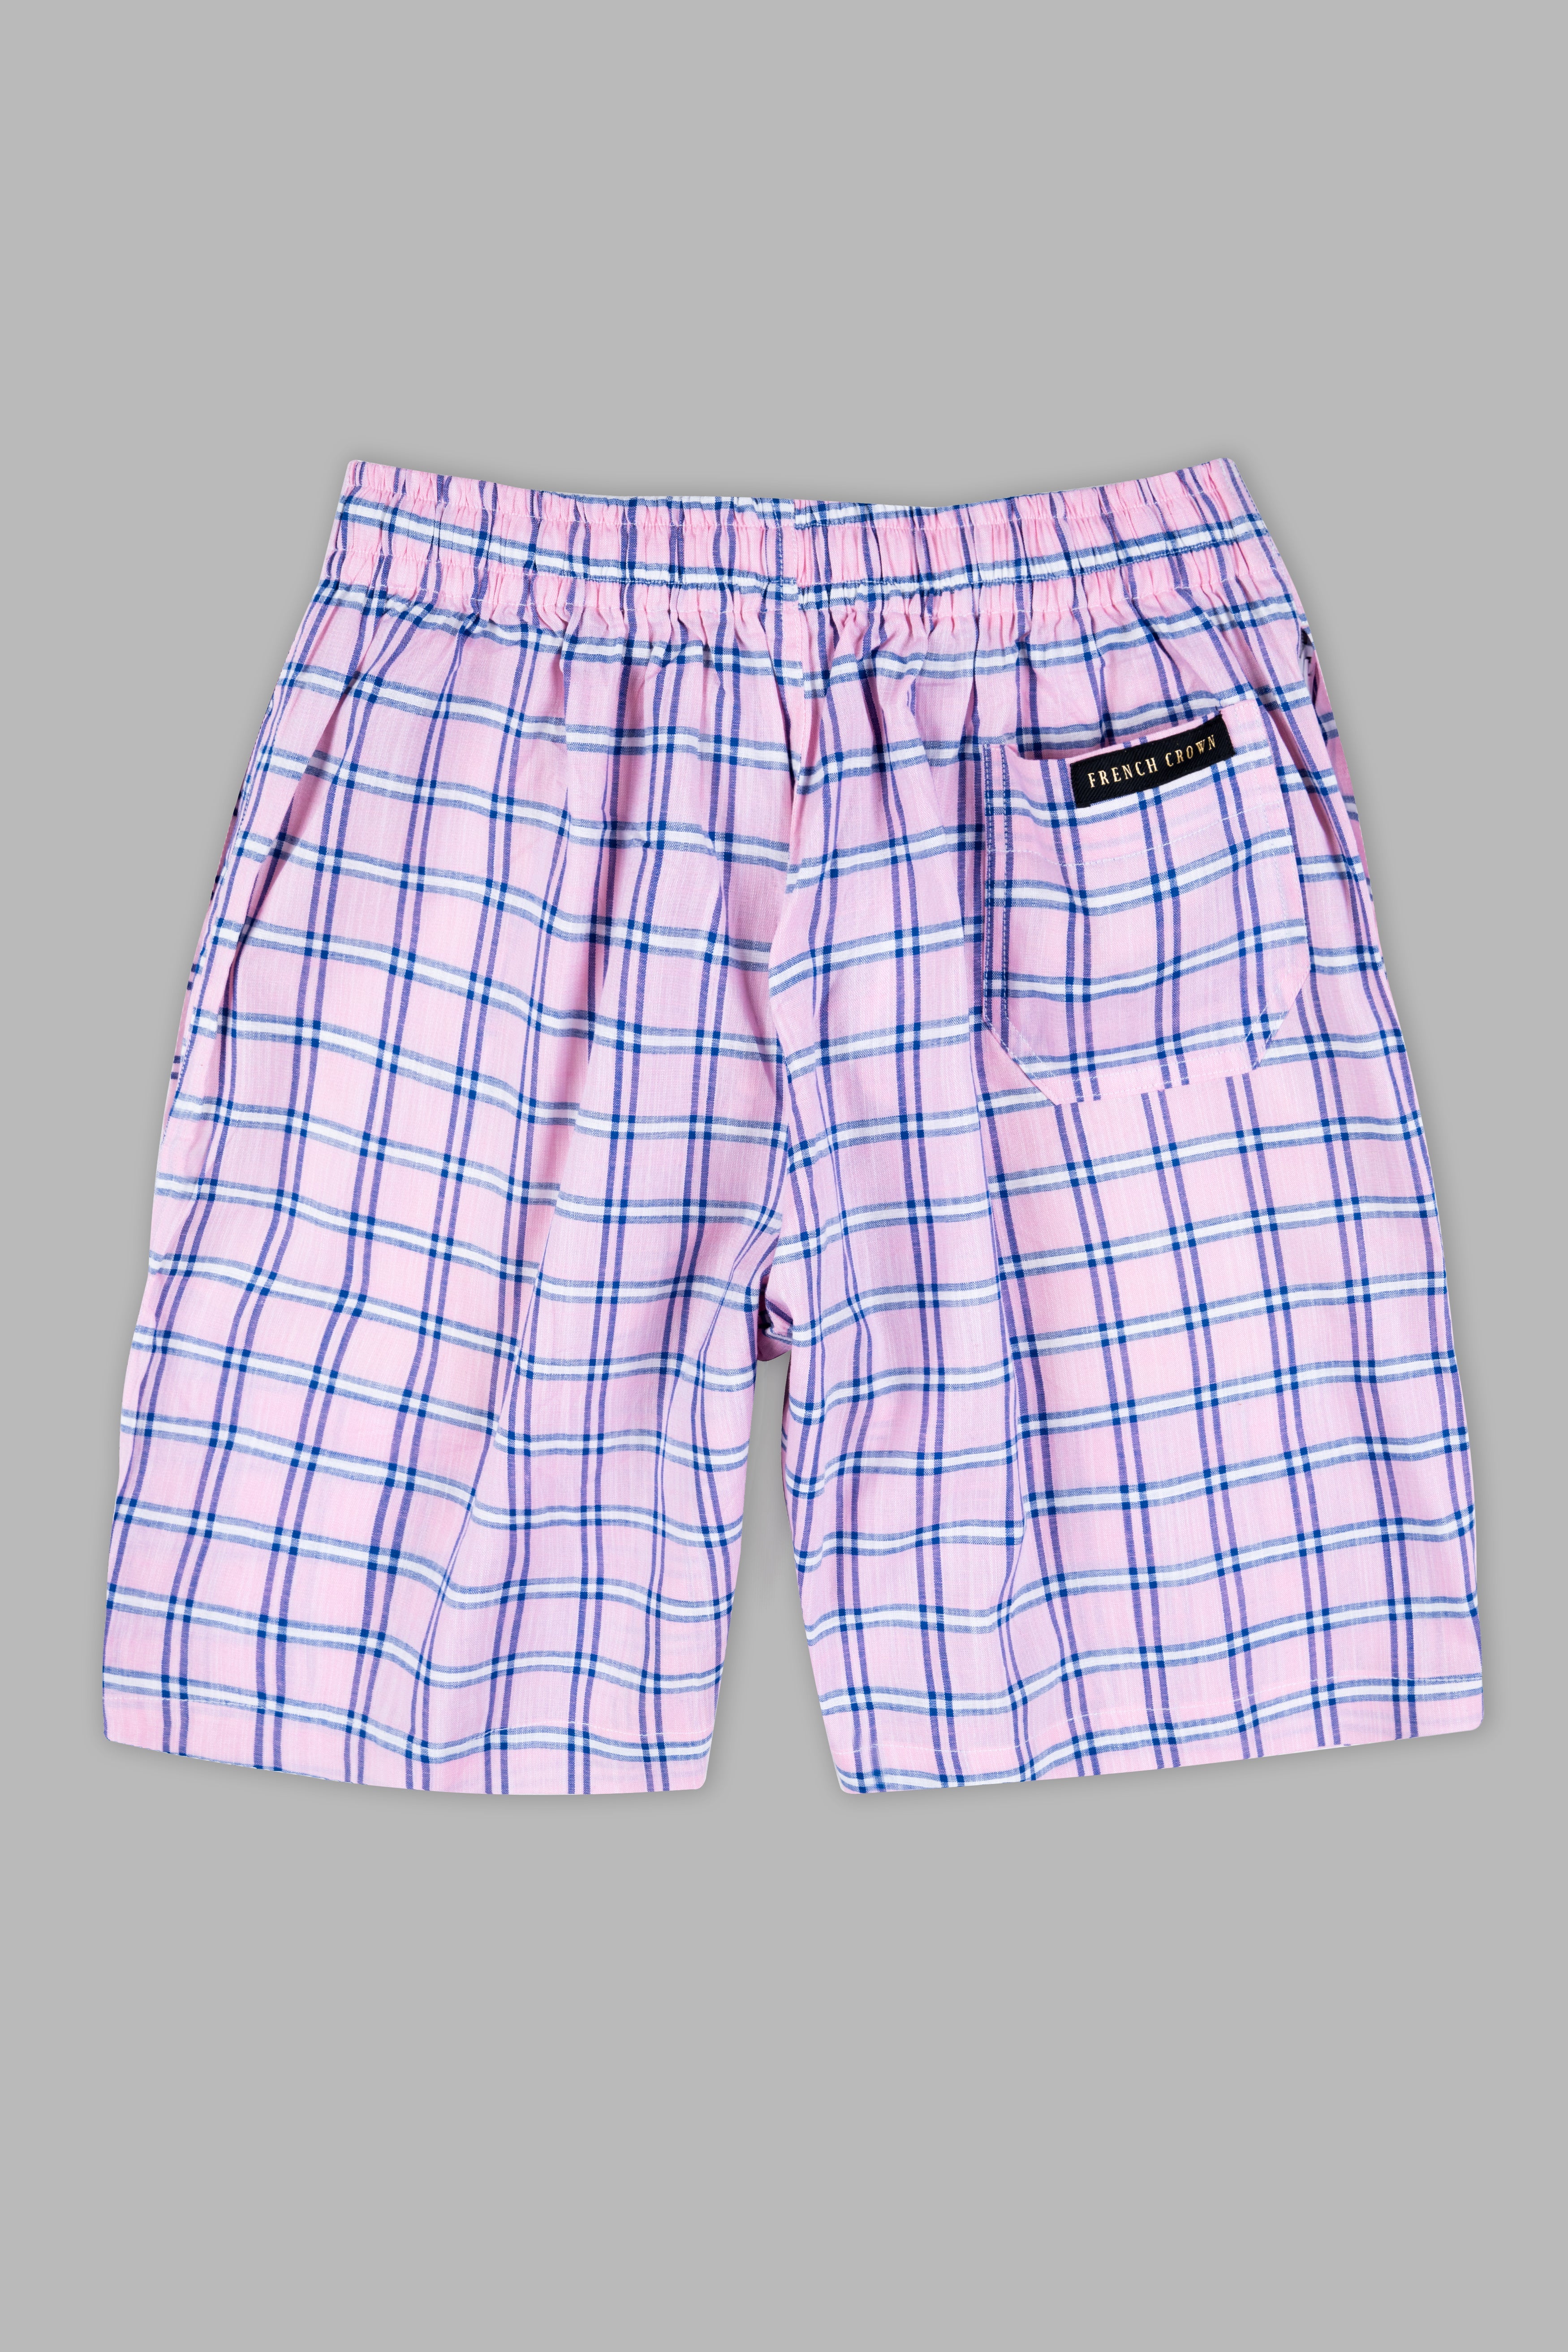 Melanie Pink and Smalt Blue Checkered Chambray Shorts SR375-28, SR375-30, SR375-32, SR375-34, SR375-36, SR375-38, SR375-40, SR375-42, SR375-44